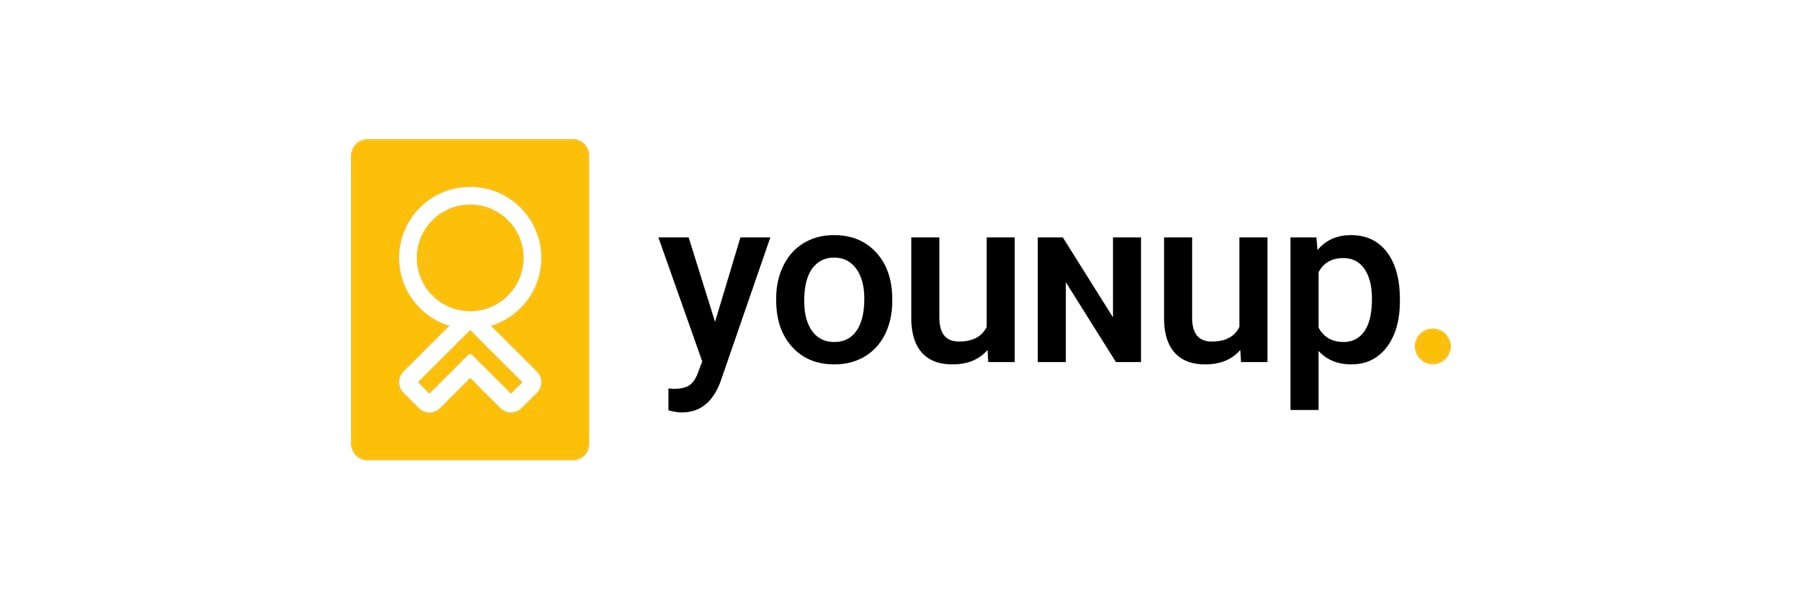 Younup